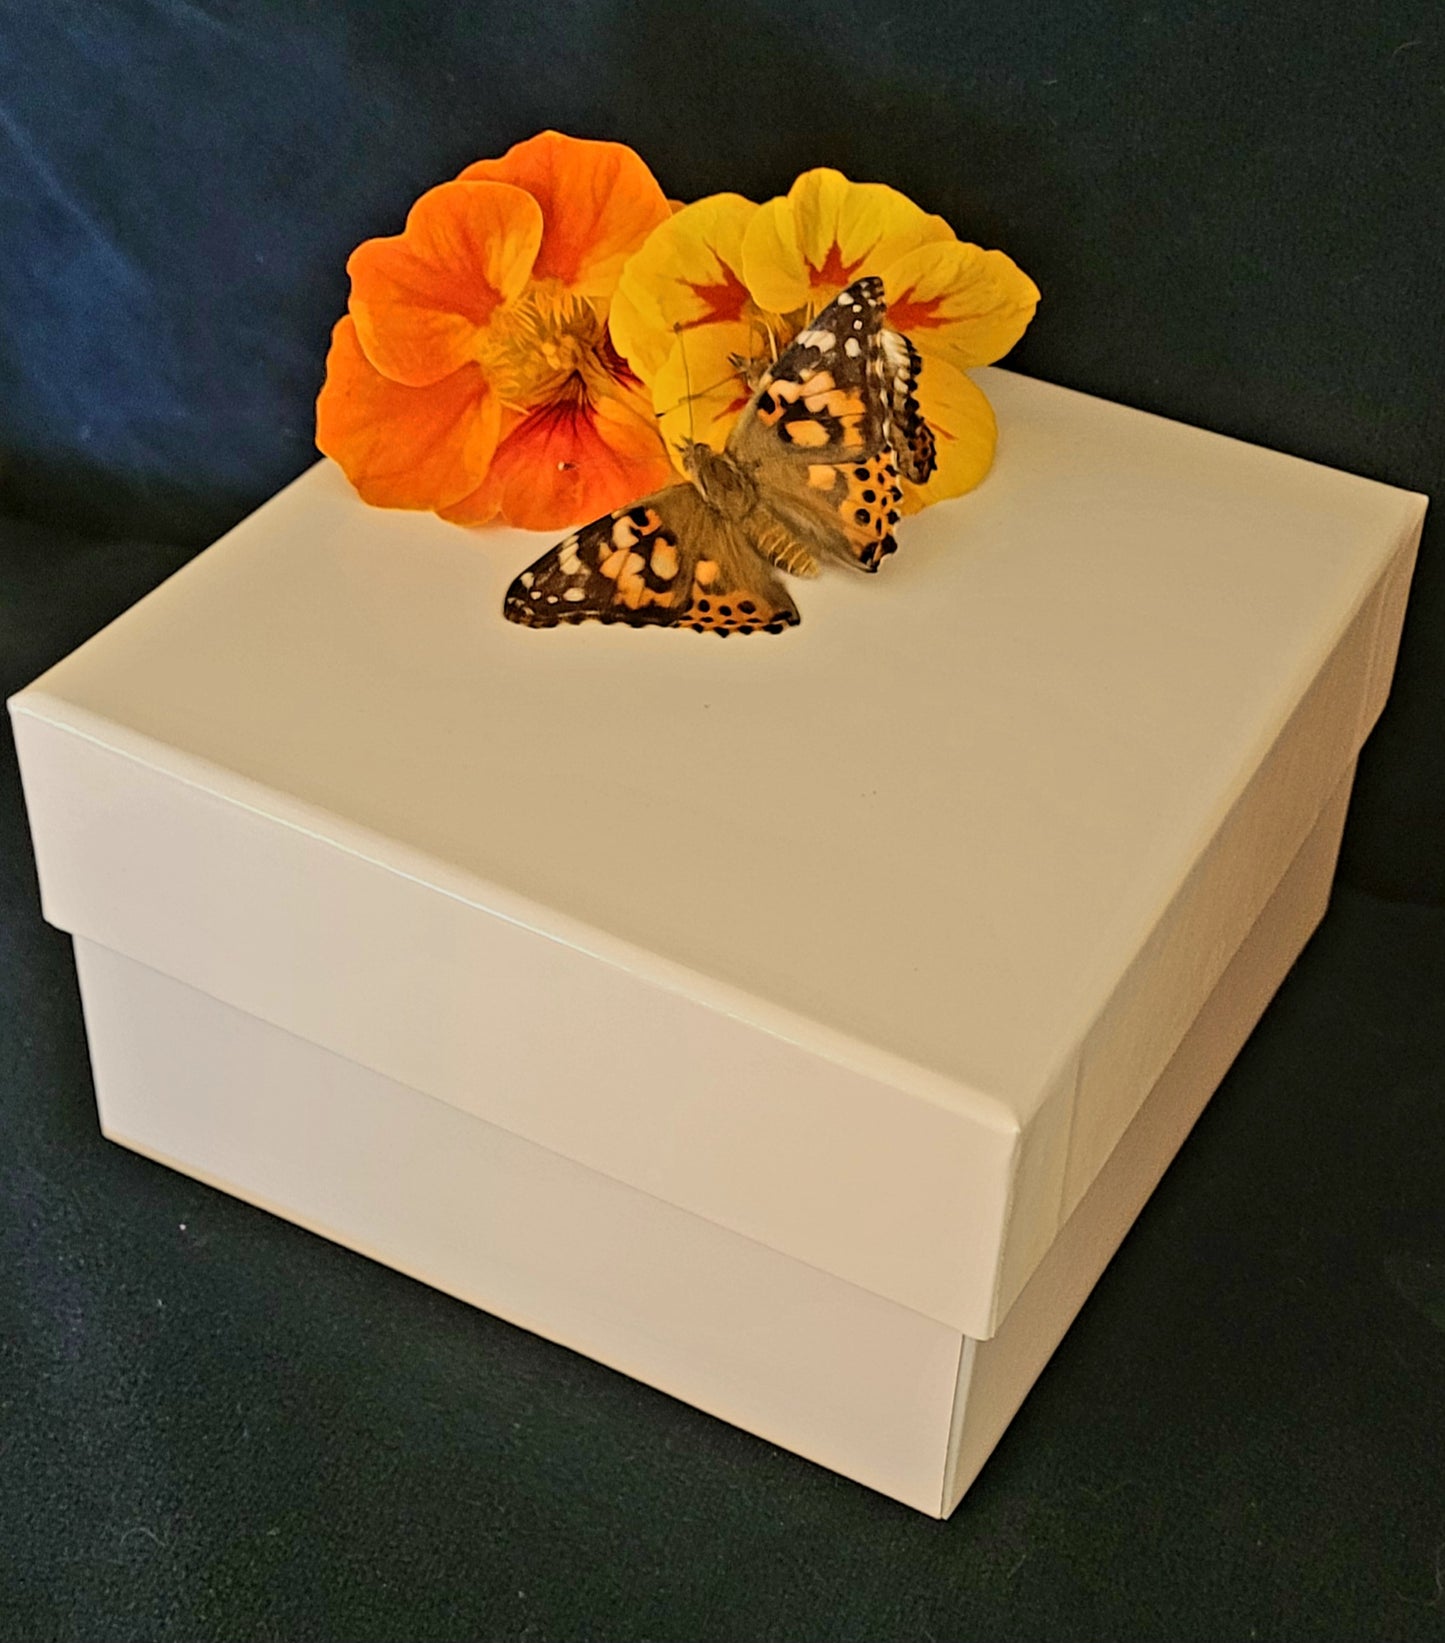 20 Painted Lady Butterflies in a Plain Mass Release Box ~ Please read IMPORTANT INFO BELOW before placing an order.